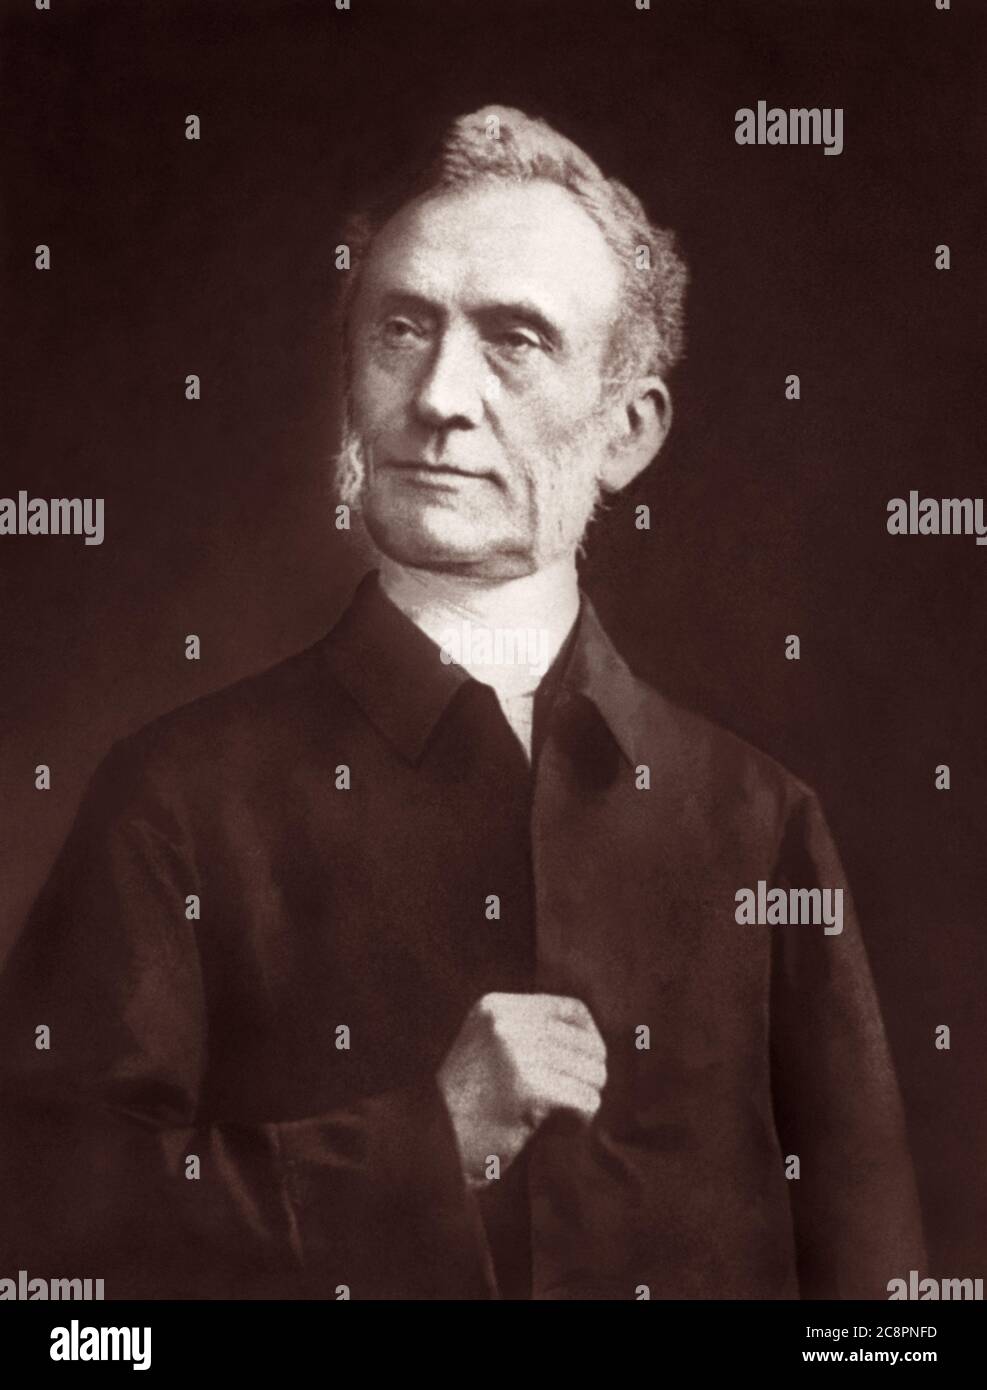 George Müller (1805-1898), a Christian evangelist, minister, and missionary, pioneered some of the earliest faith orphanage homes in Bristol, England in the 1830s. Relying on prayer and faith, rather than solicitation of funds from others, Müller would care for 10,024 orphans during his lifetime. He established 117 schools which offered Christian education to more than 120,000. Stock Photo